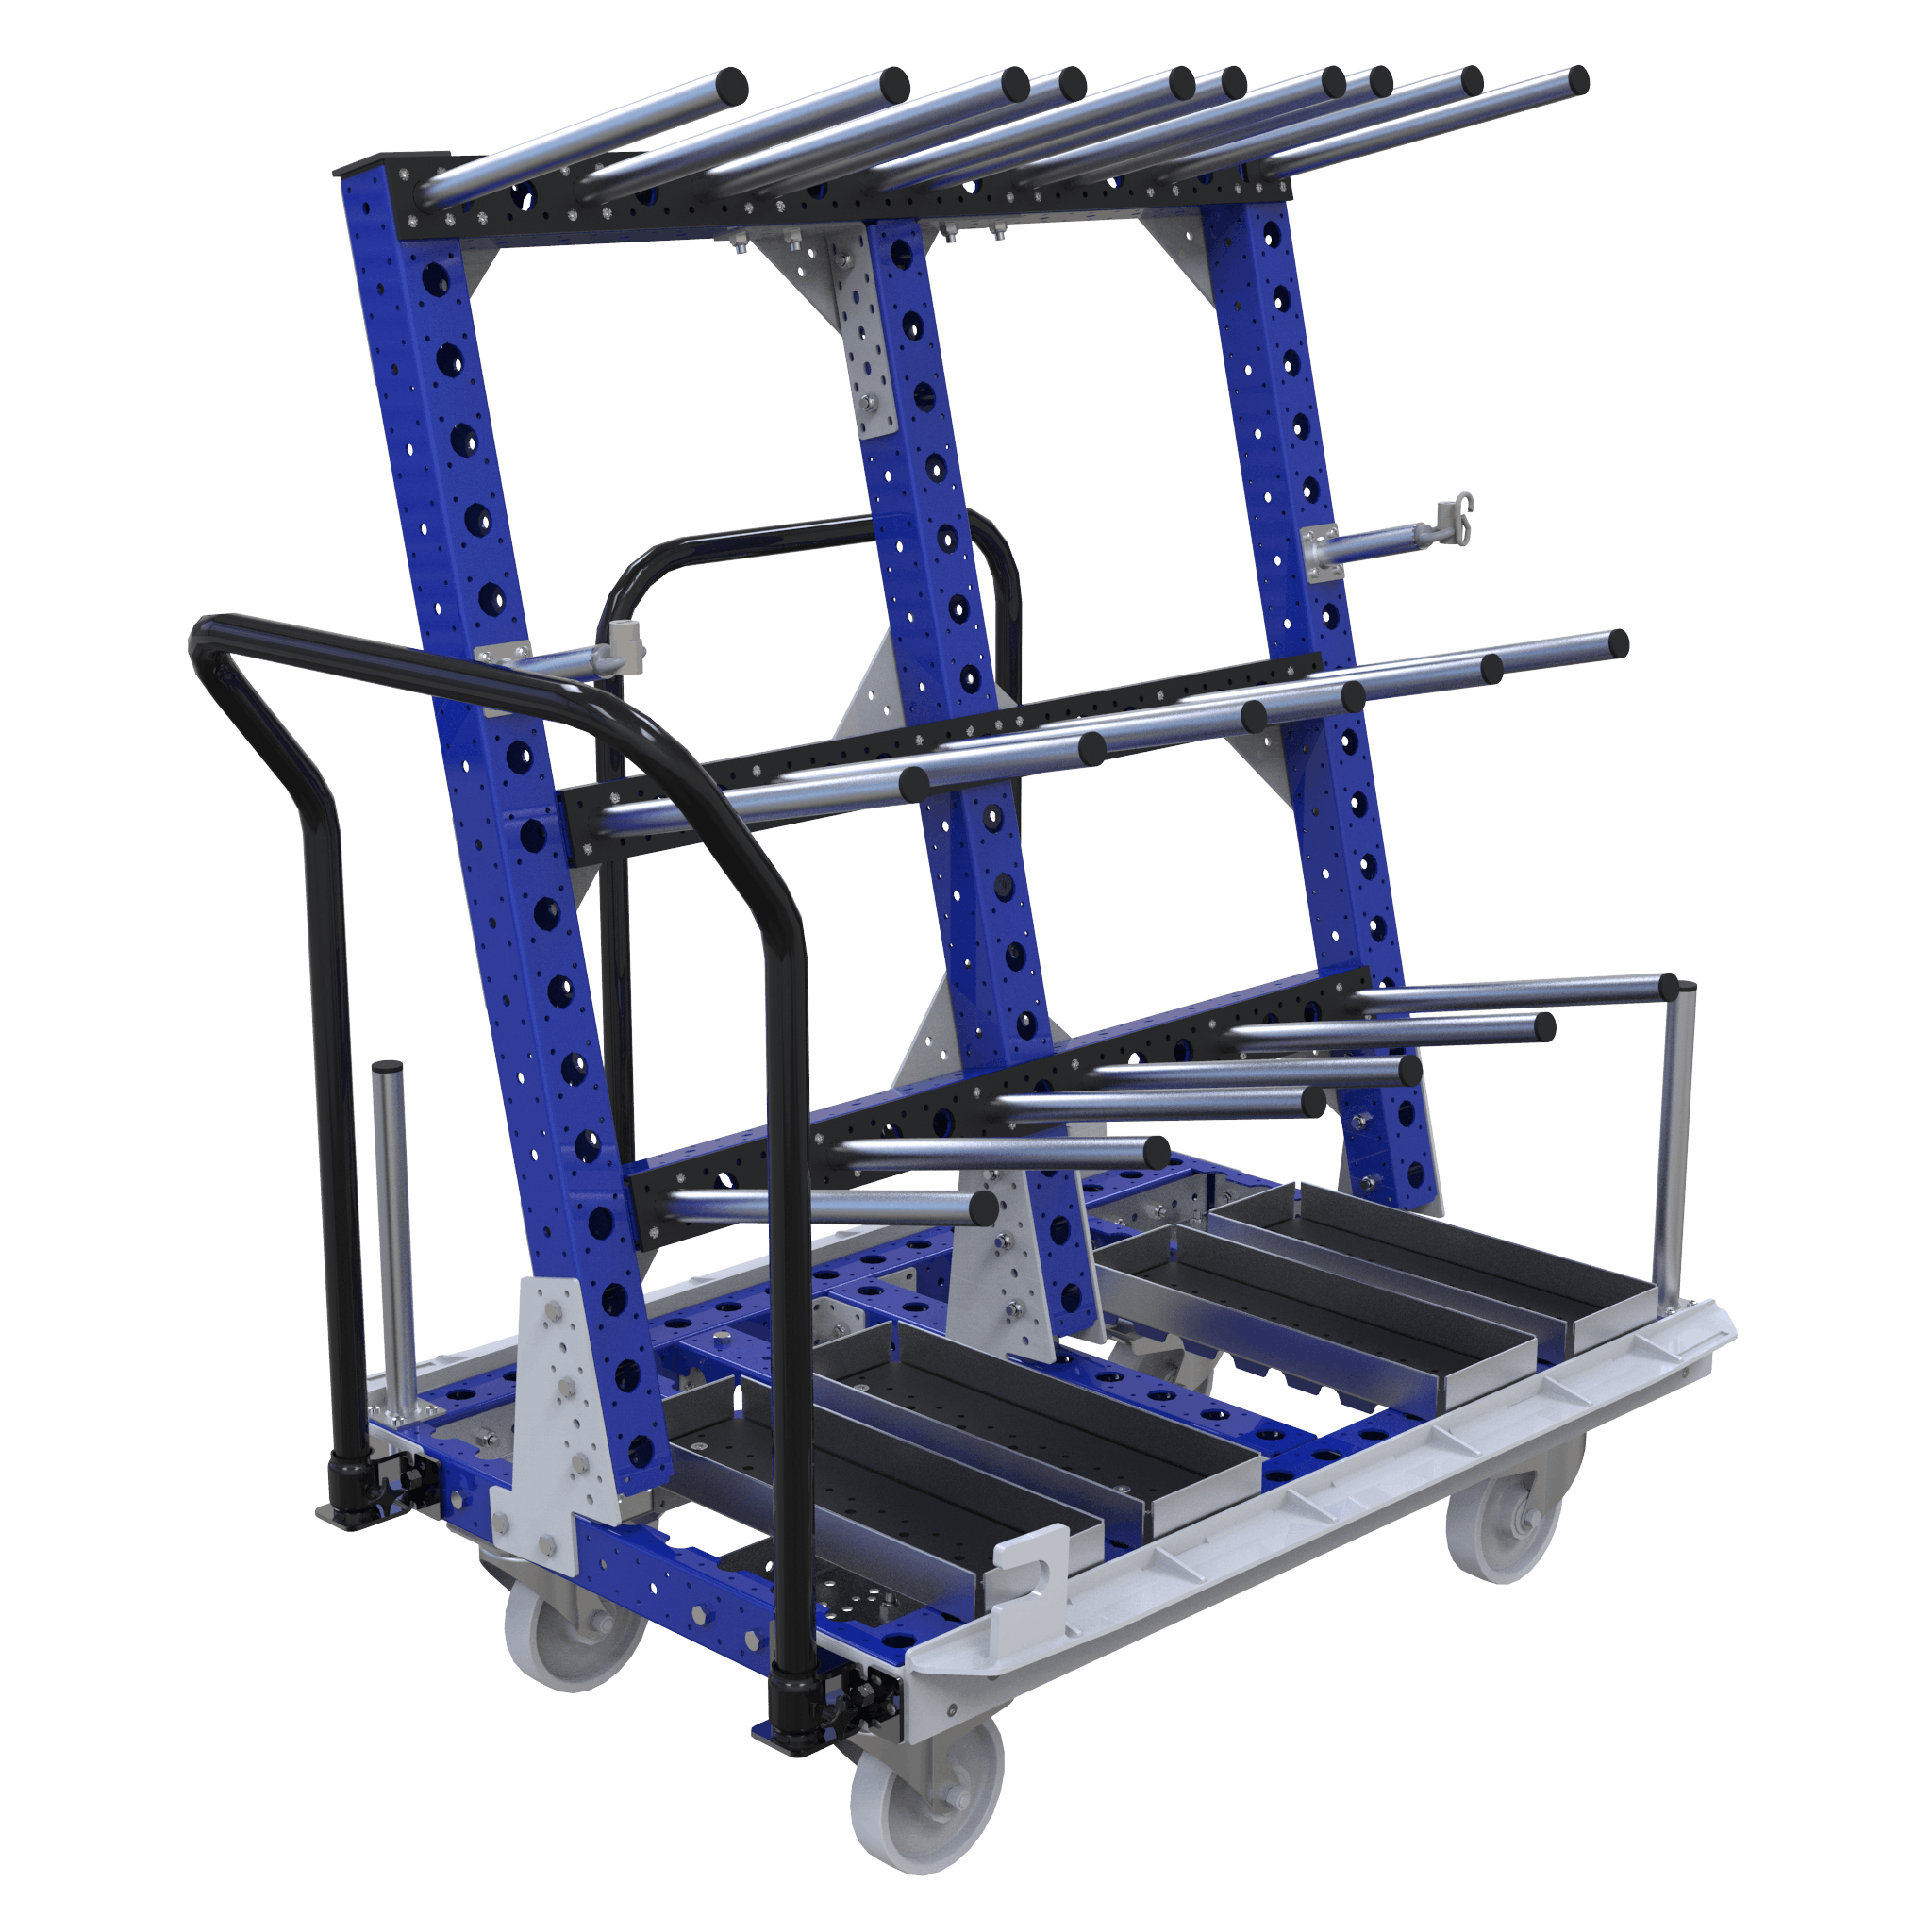 Material handling cart designed to store and transport kits of automotive components.